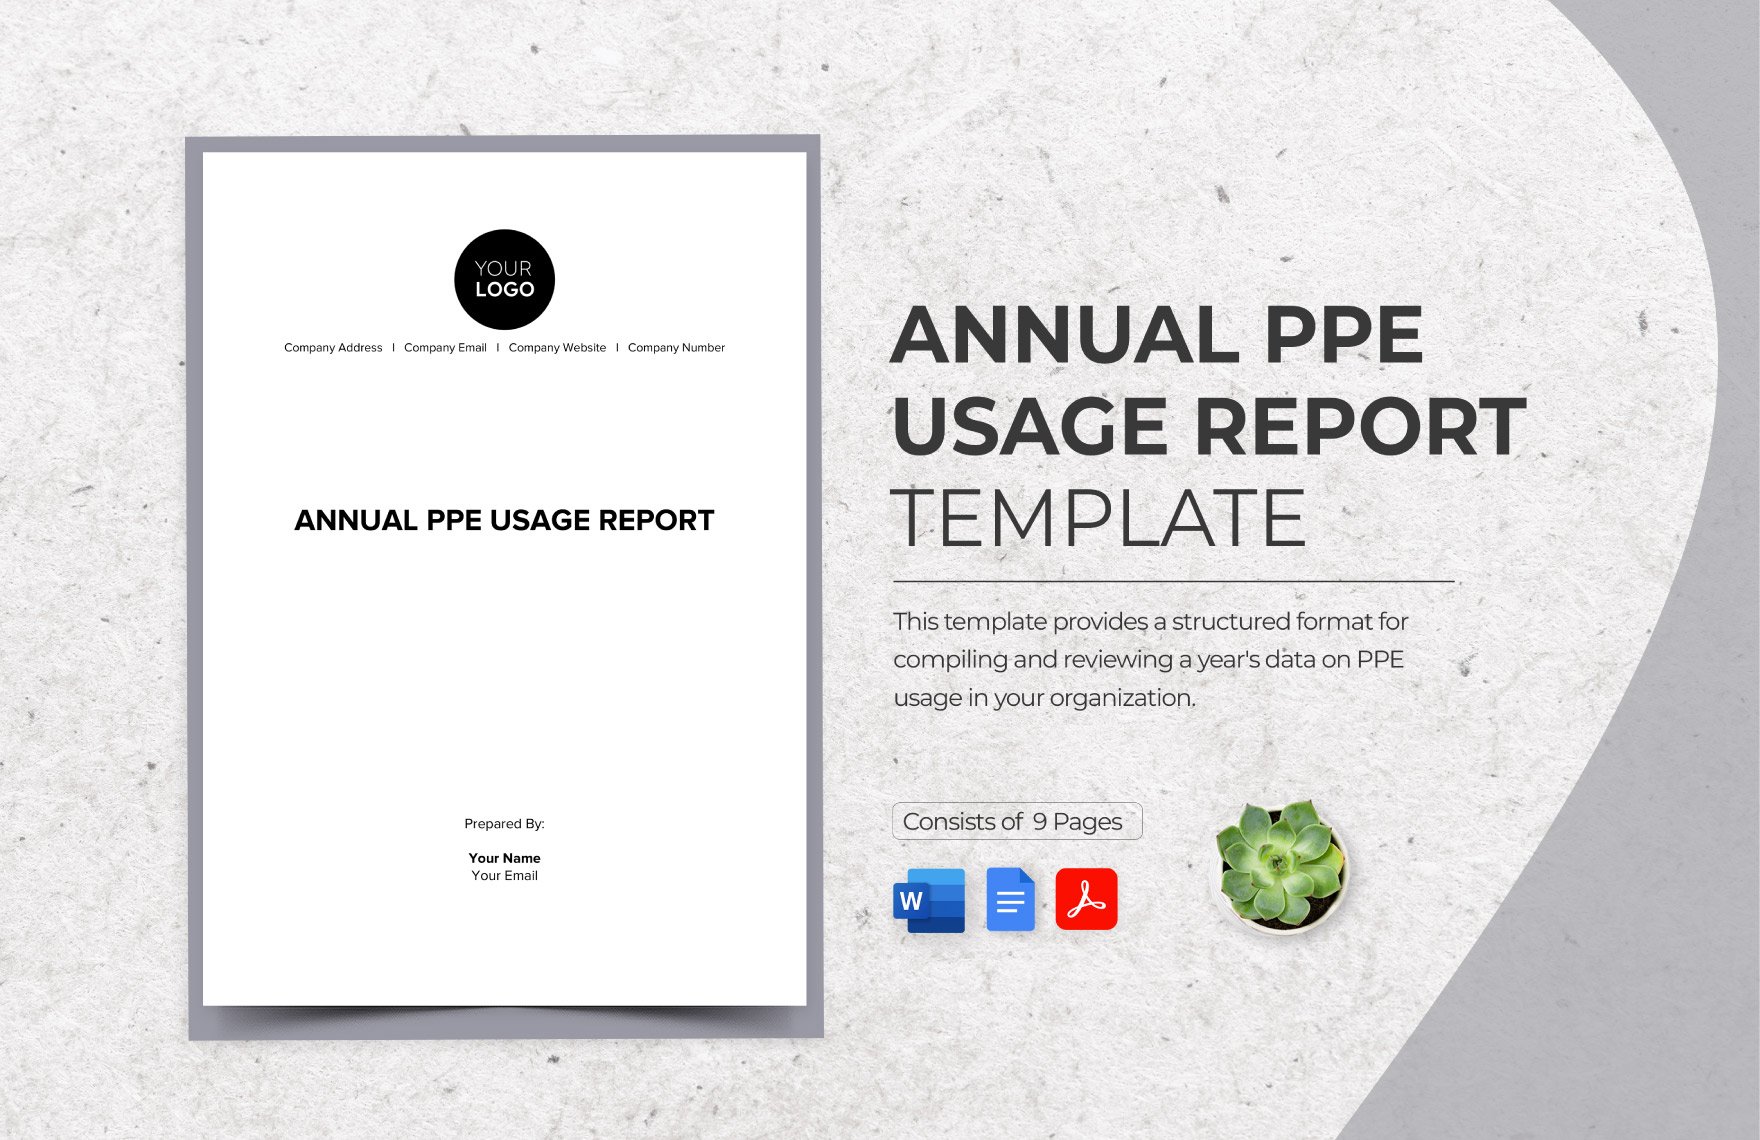 Annual PPE Usage Report Template